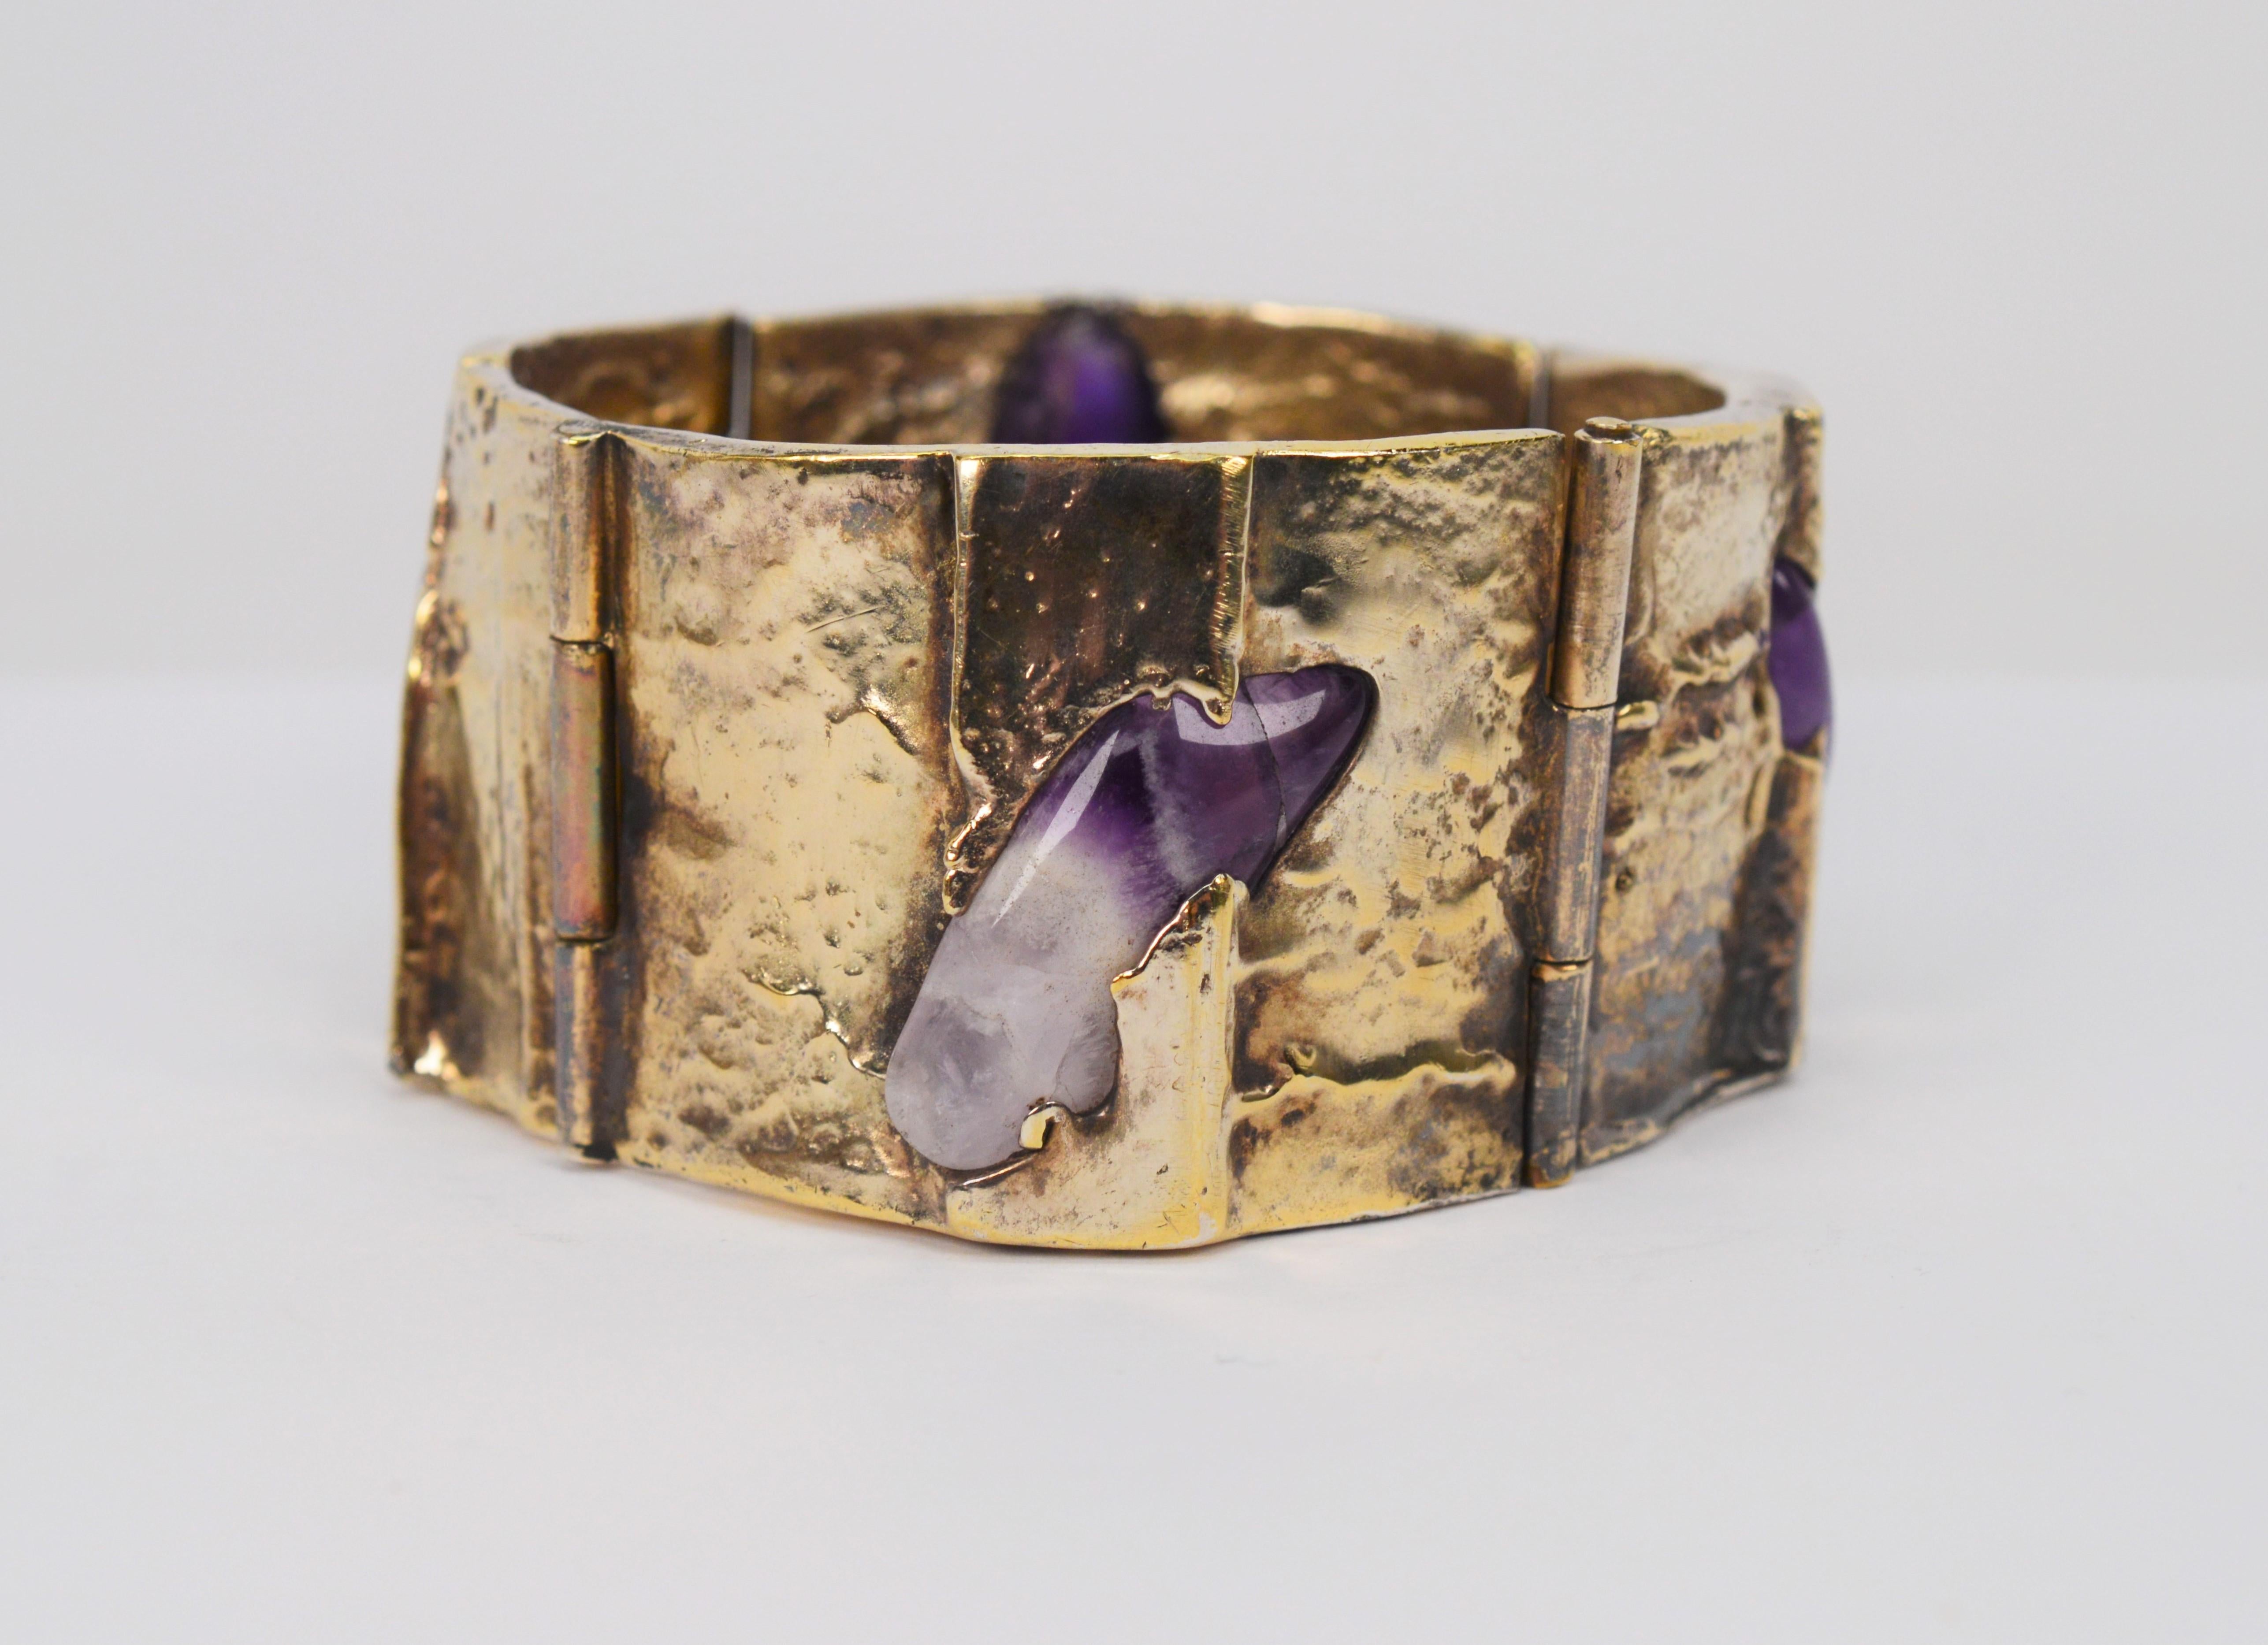 Eclectic and stunning describes this rustic wearable art bracelet with natural amethyst quartz stone. Craftsman made of four hand hammered hinged panels of 500 toned silver and gilded to enhance the outstanding natural beauty of the imbedded polish